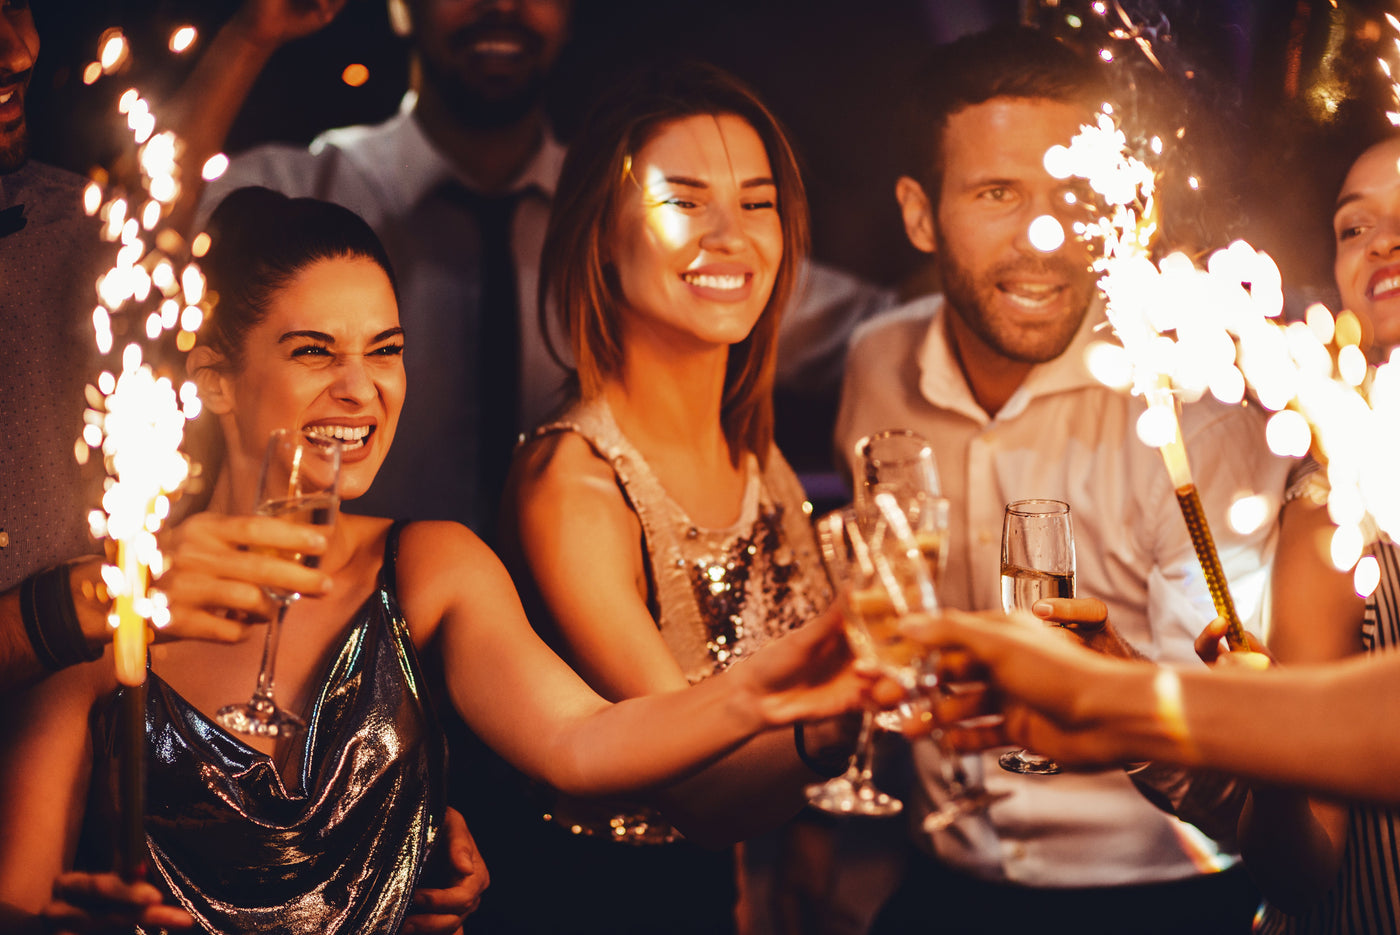 Wholesale Sparklers at a Club being celebrated with champagne and cake sparkler